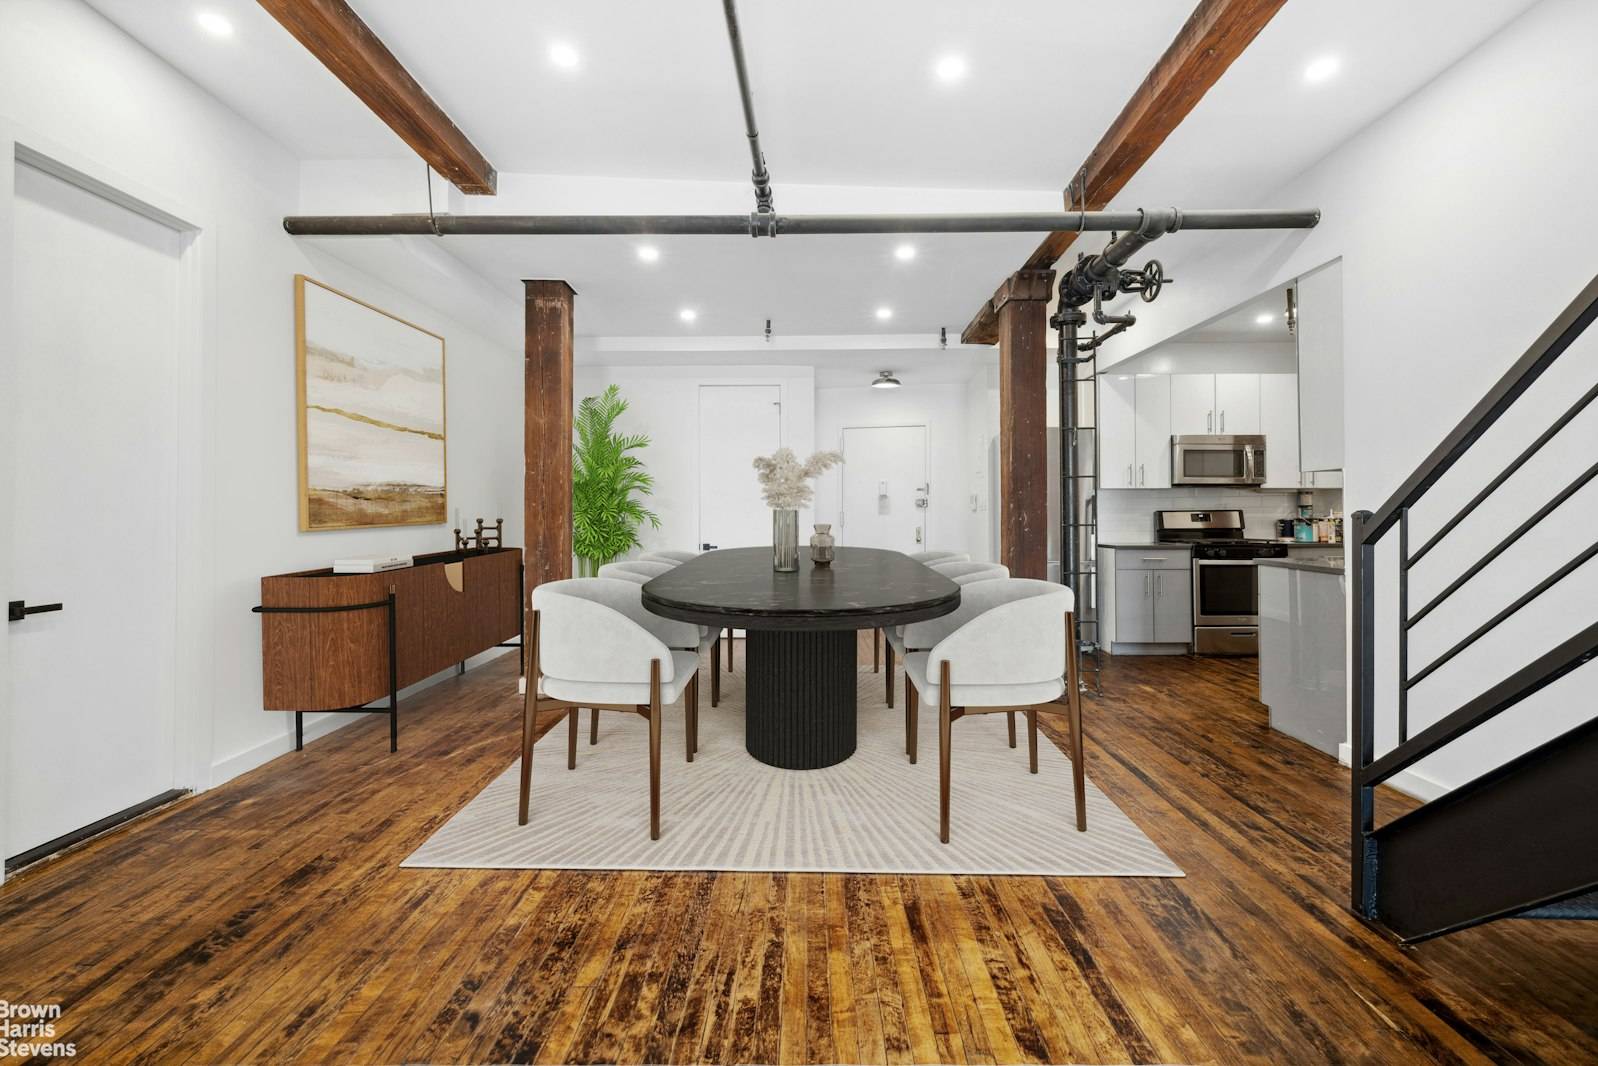 Offered for Rent Newly Renovated 4 Bedroom, 2 Bathroom with Private Roof DeckWelcome to unit 4PHE, a newly renovated 4 bedroom apartment at the renowned Knitting Factory Lofts of Clinton ...